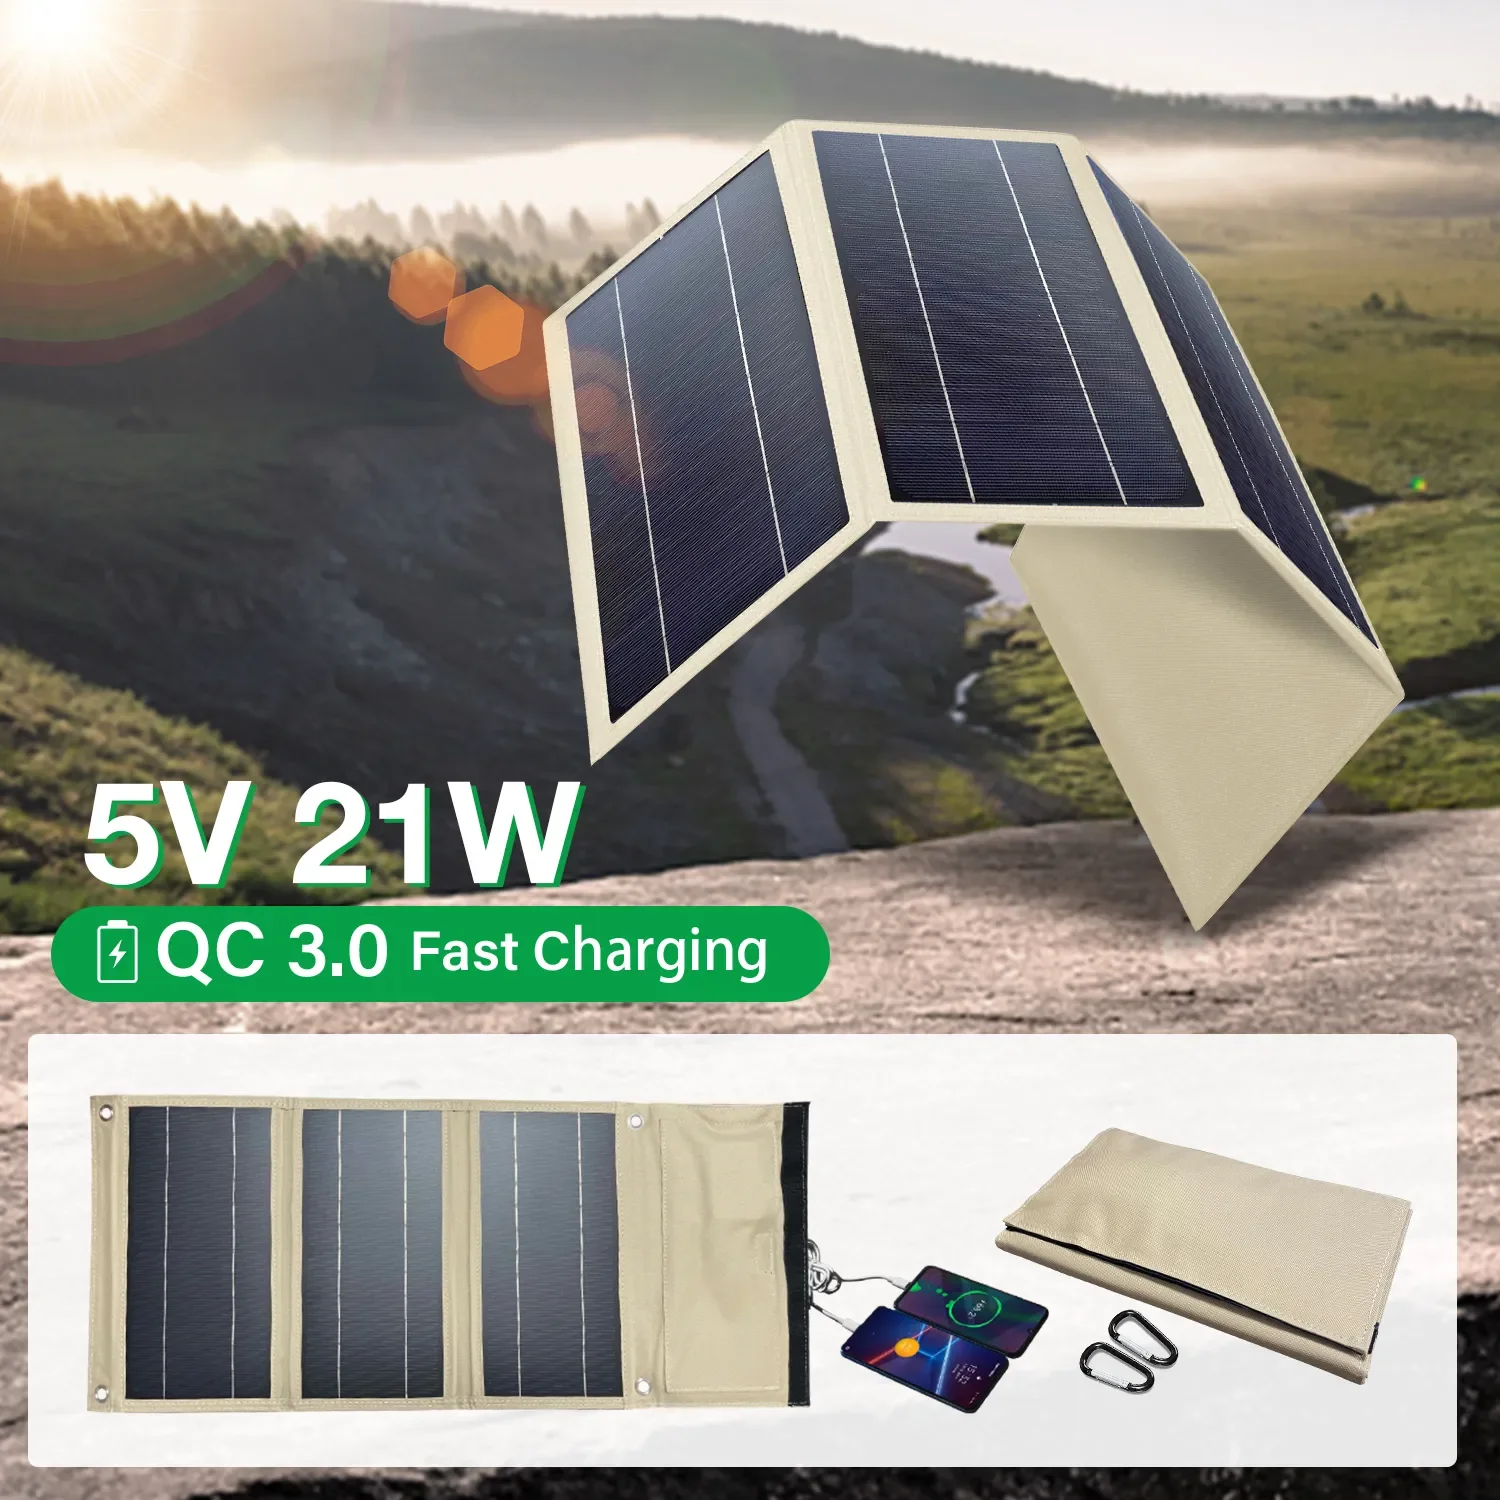 

Outdoor powerful Solar Panel 5v 21w Portable battery phone charge 2USB QC 3.0 9V 12V For notebook Power bank Oxygen camera fan